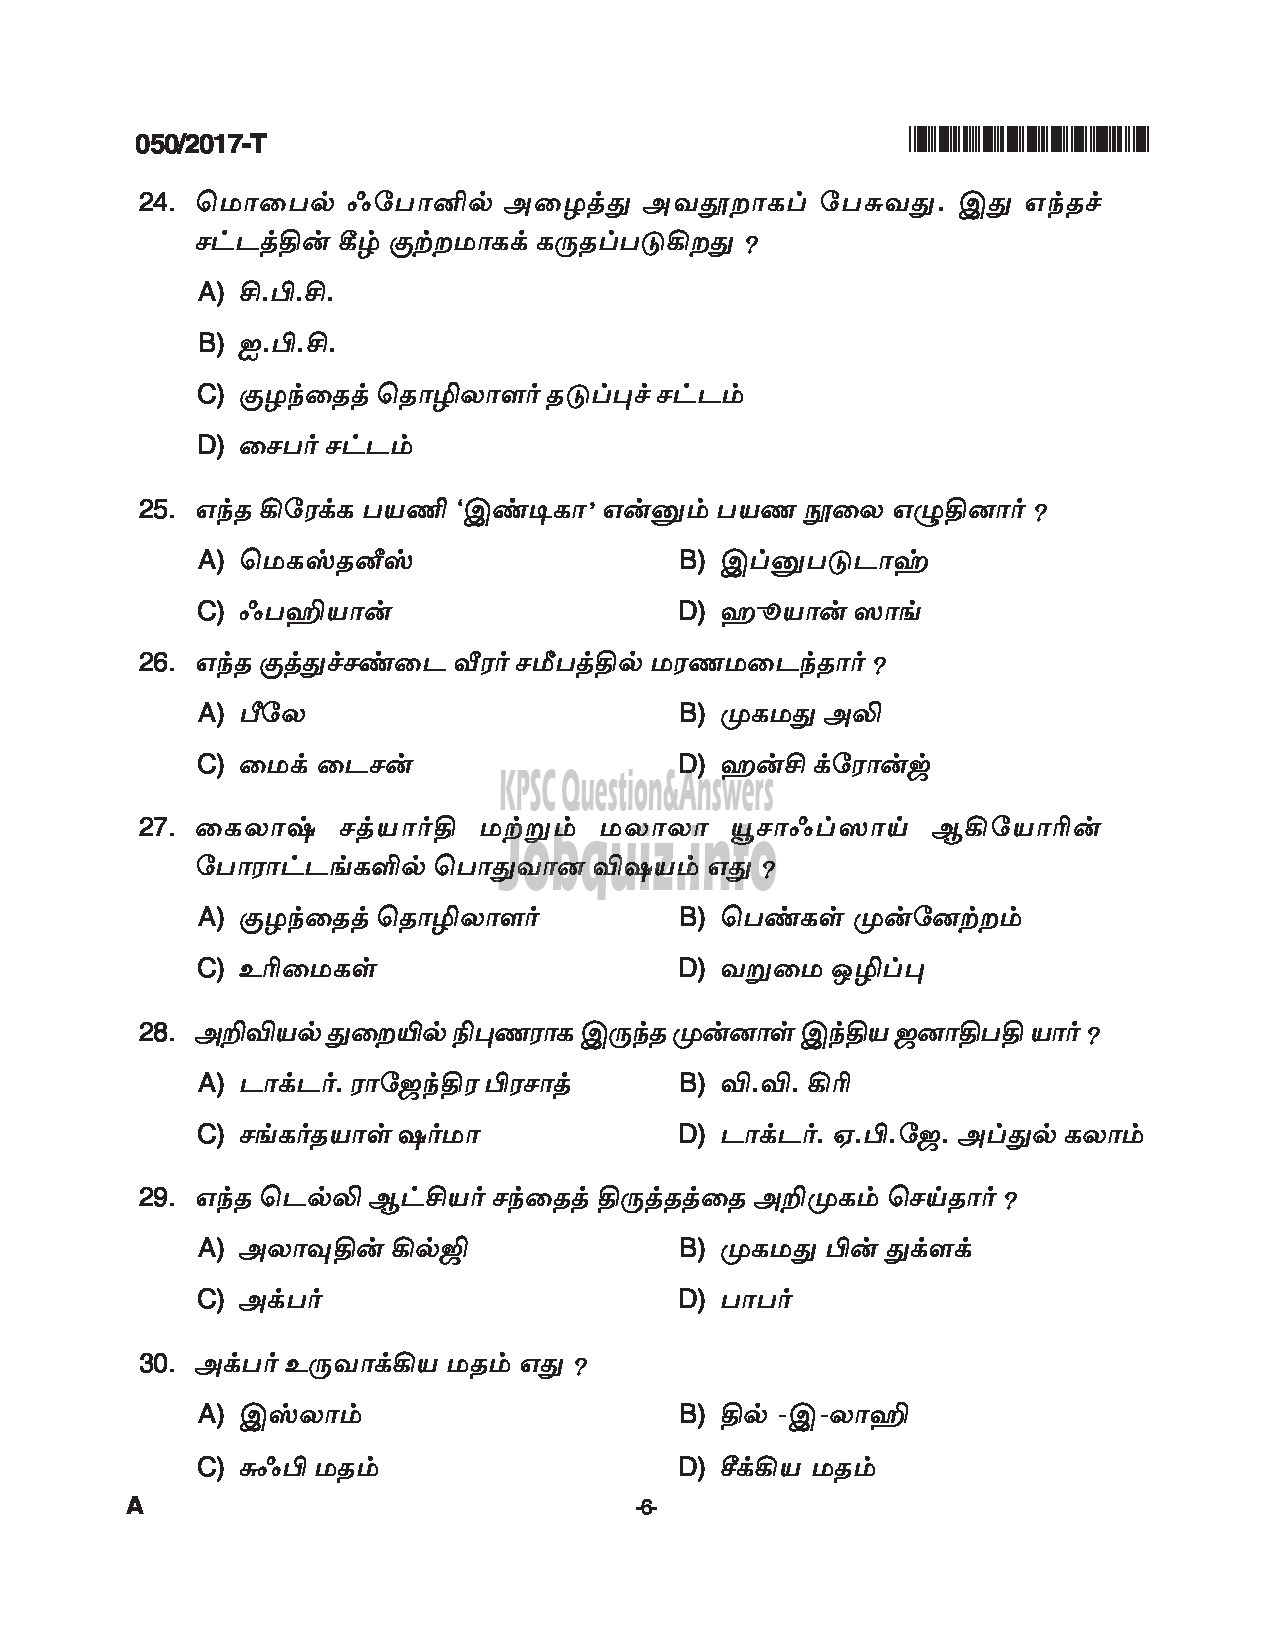 Kerala PSC Question Paper - LDC SR FOR SC/ST, SR FROM DIFFERENTLY ABLED CANDIDATES CAT.NO 122/16, 413/16 QUESTION PAPER(TAMIL)-6